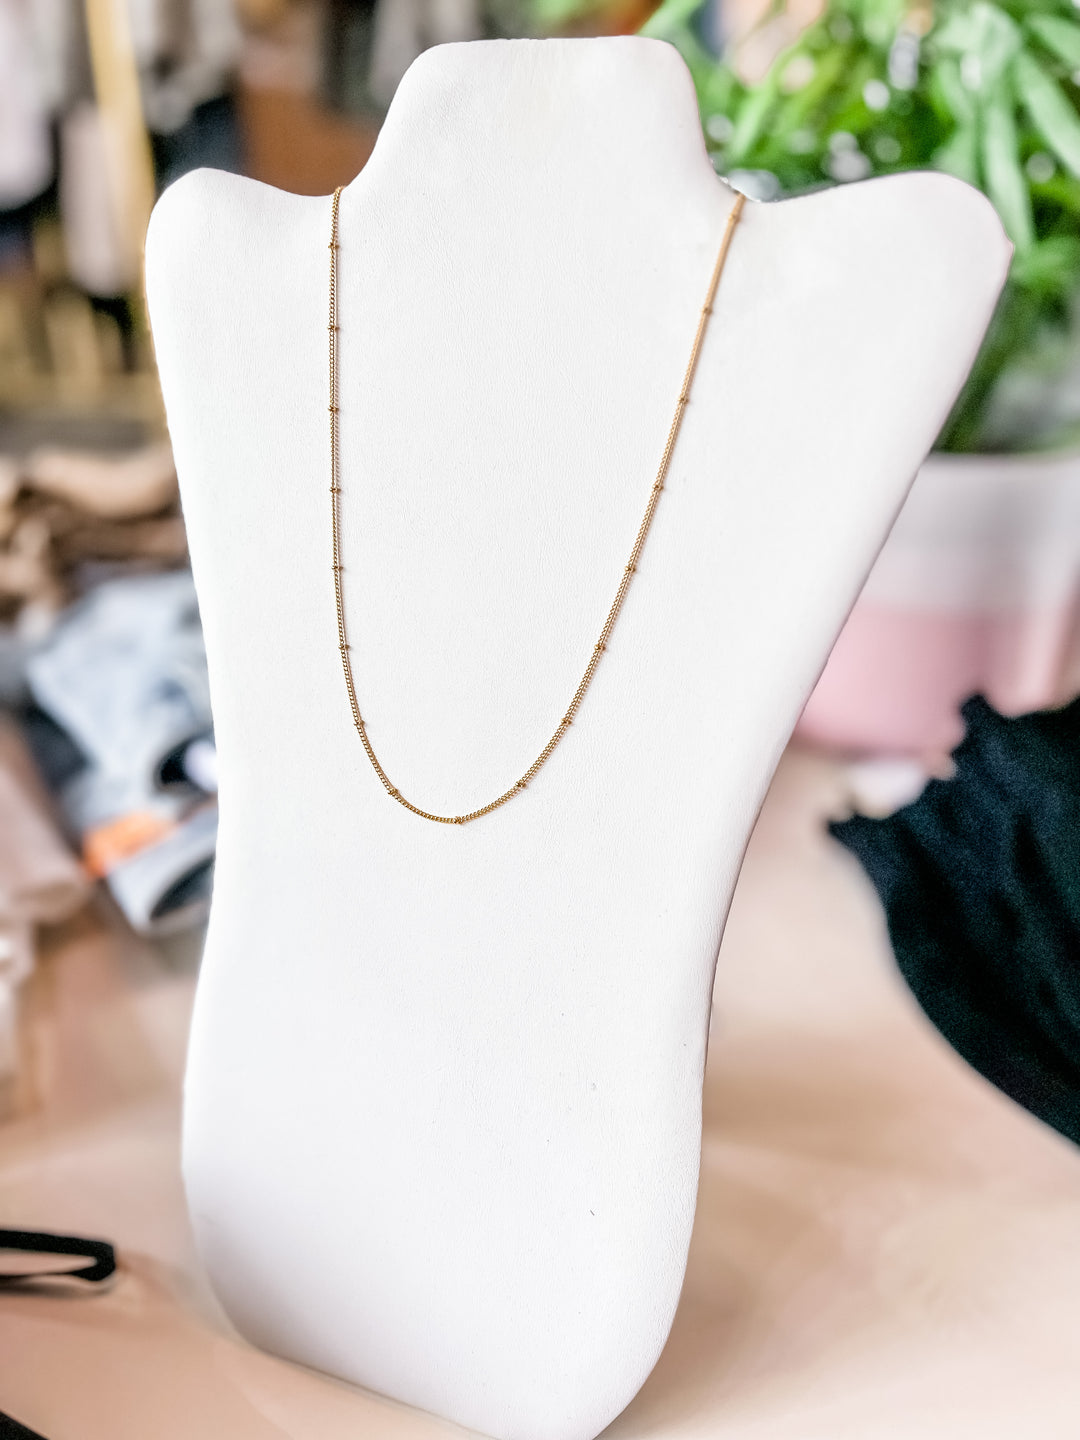 The 18K Gold Plated Dainty Beaded Necklace